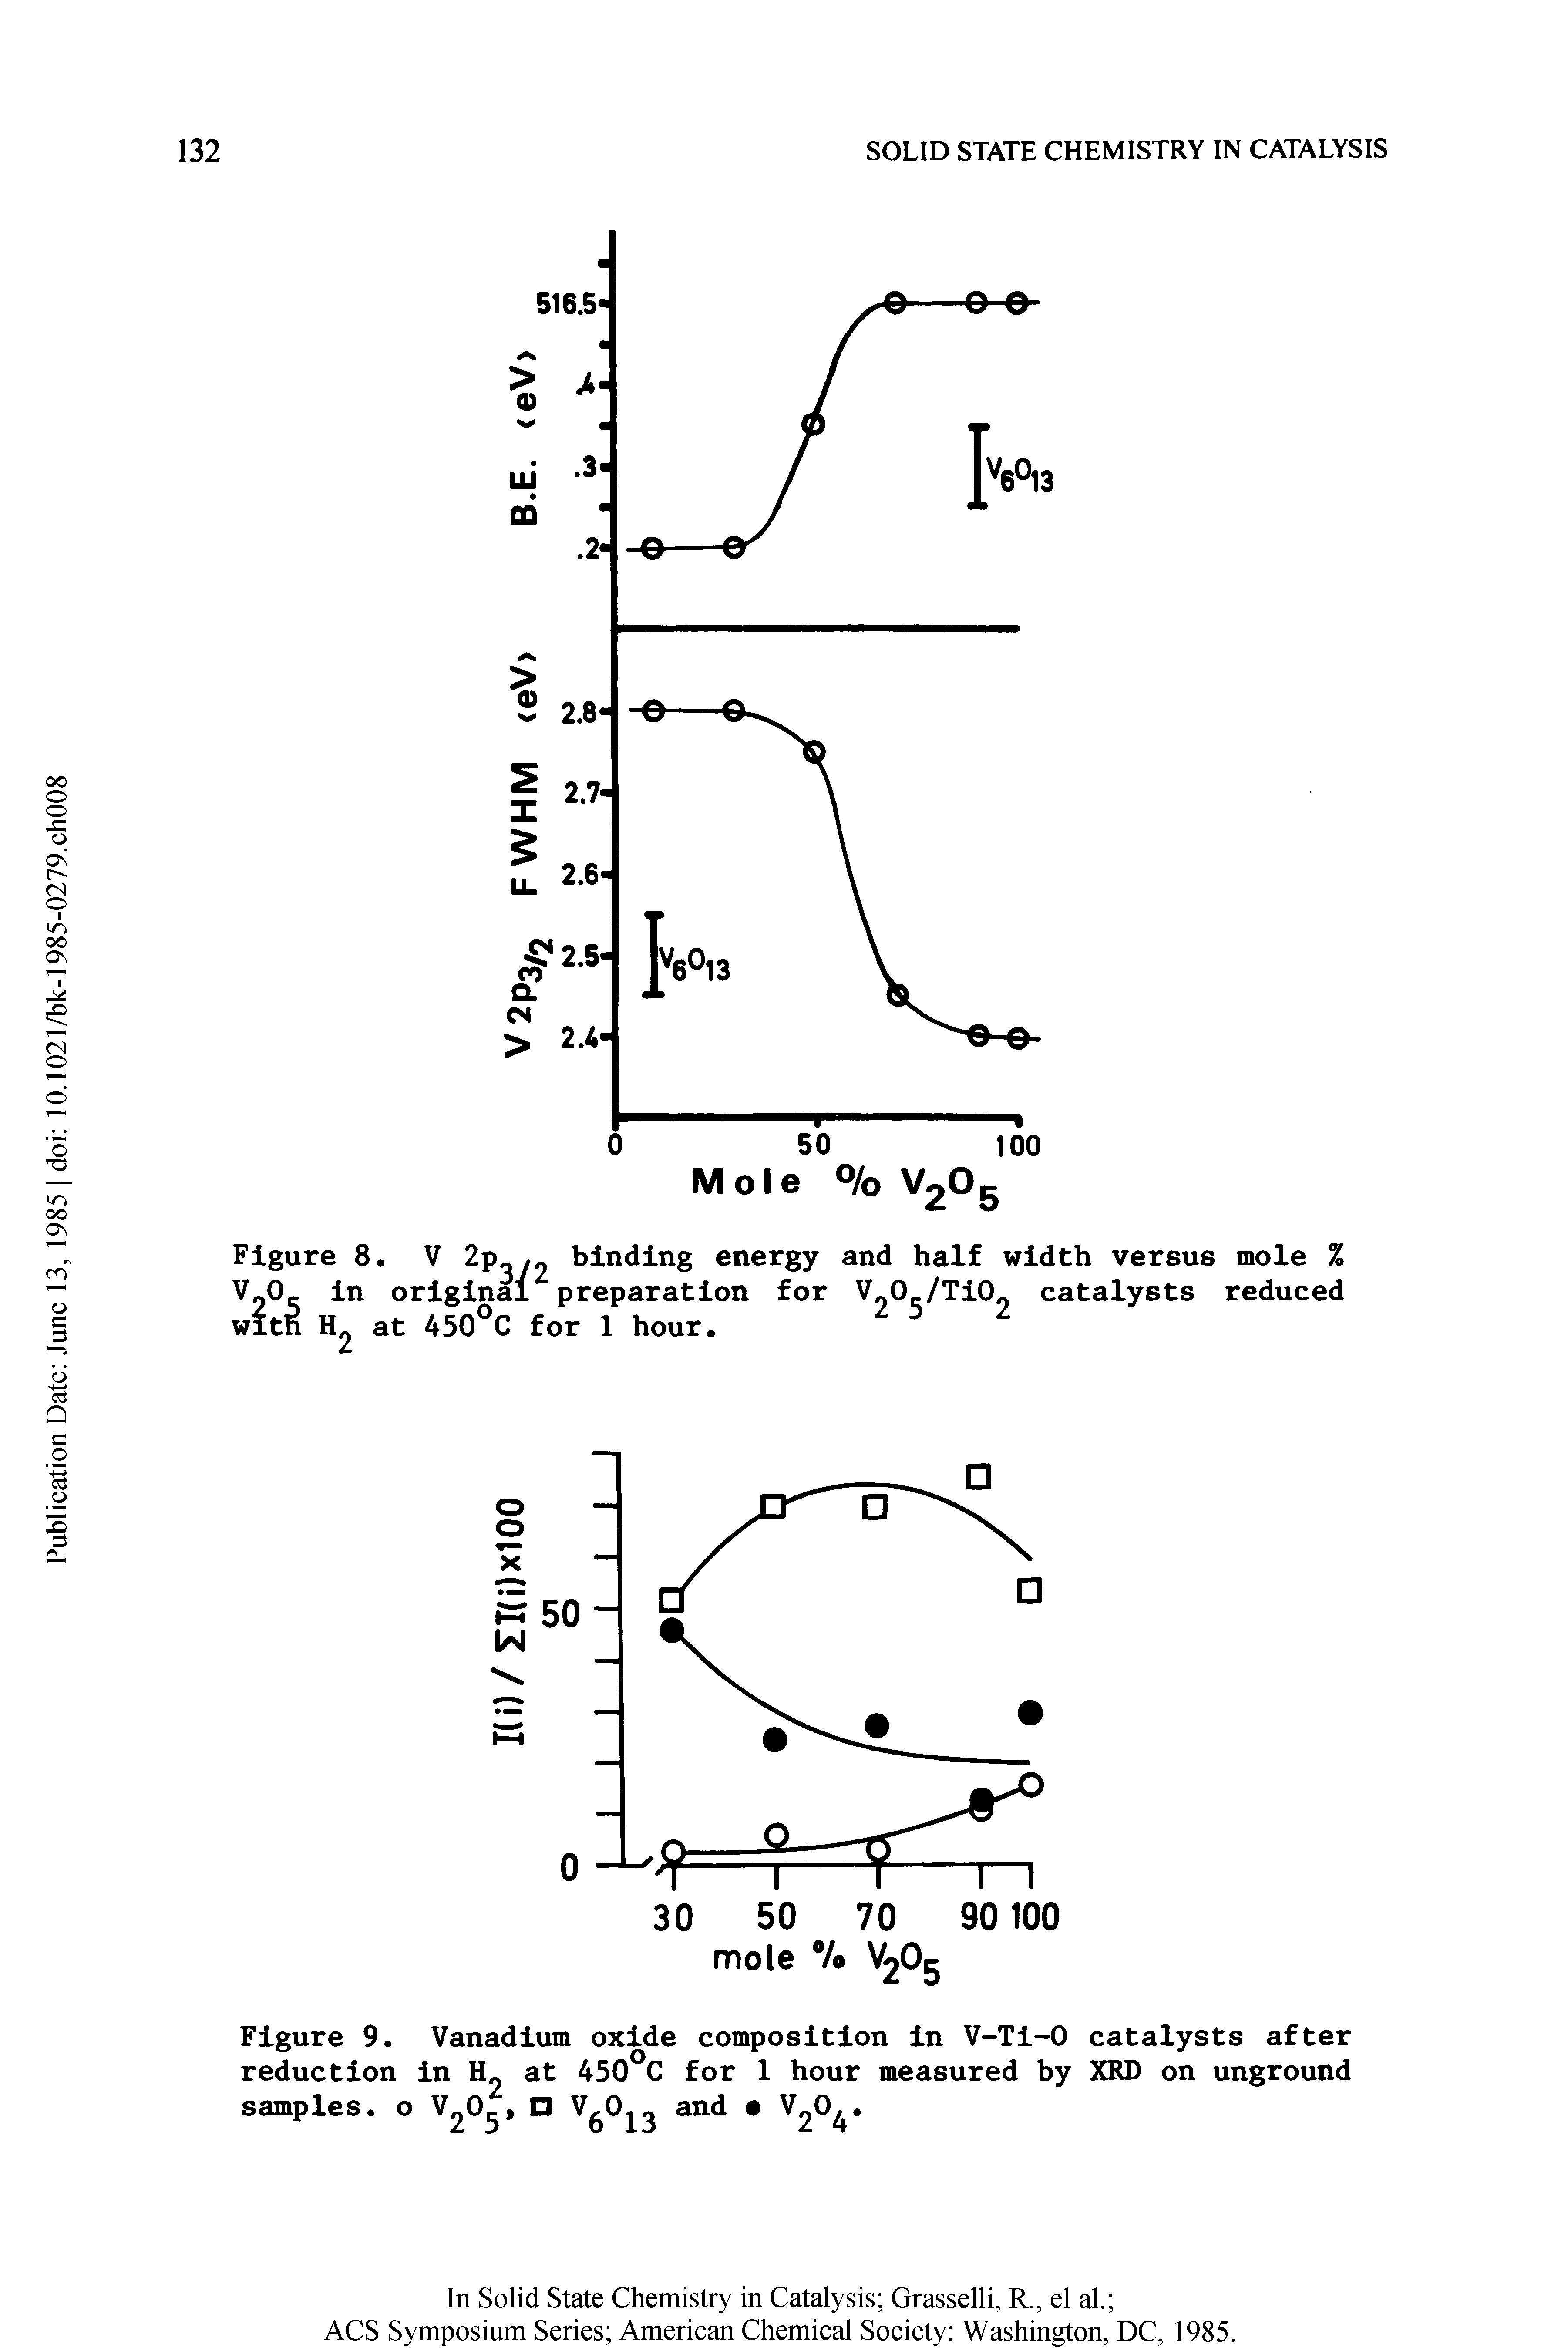 Figure 8. V binding energy and half width versus mole % V 0- in original" preparation for V O /TiO catalysts reduced with H at 450 C for 1 hour.